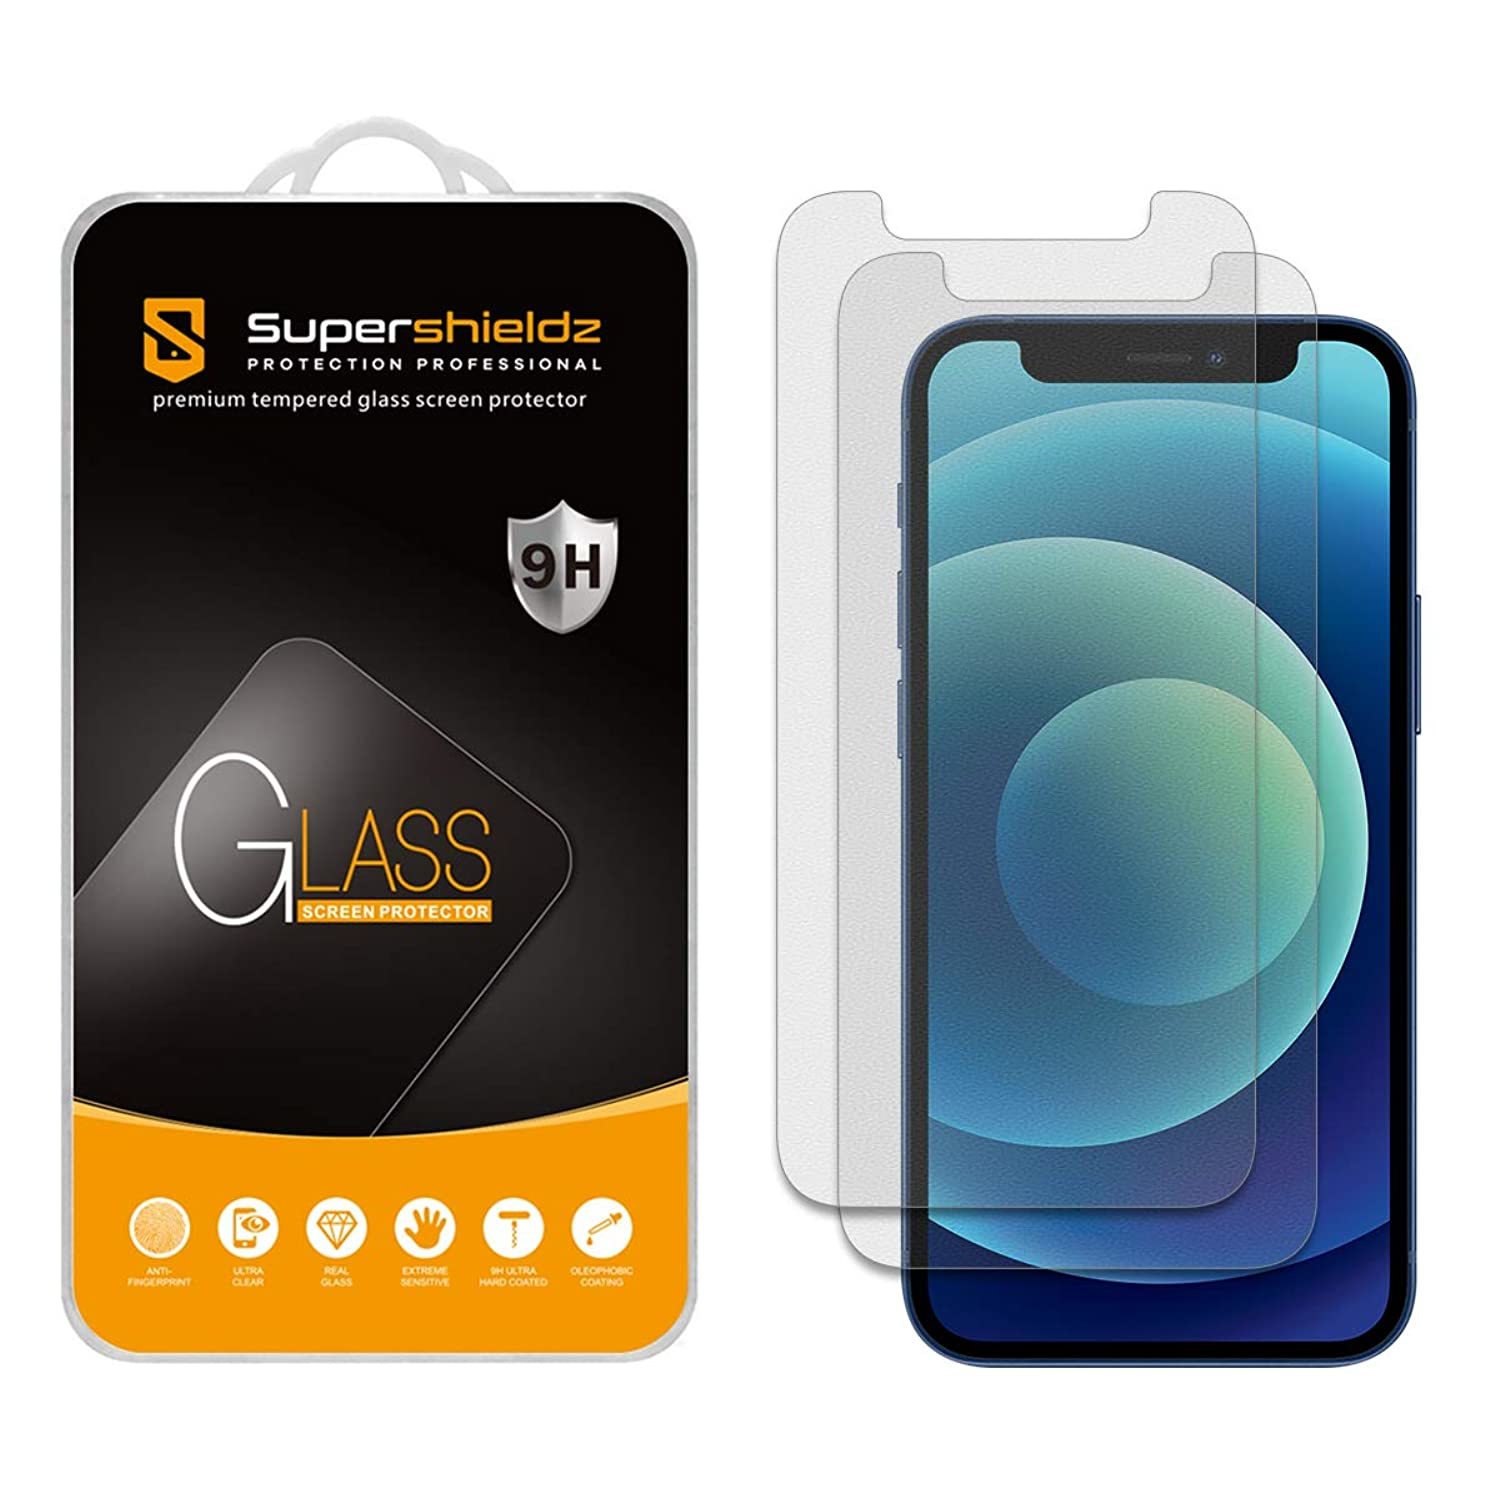 (2 Pack) Supershieldz Anti-Glare (Matte) Screen Protector Designed for iPhone  - $14.99